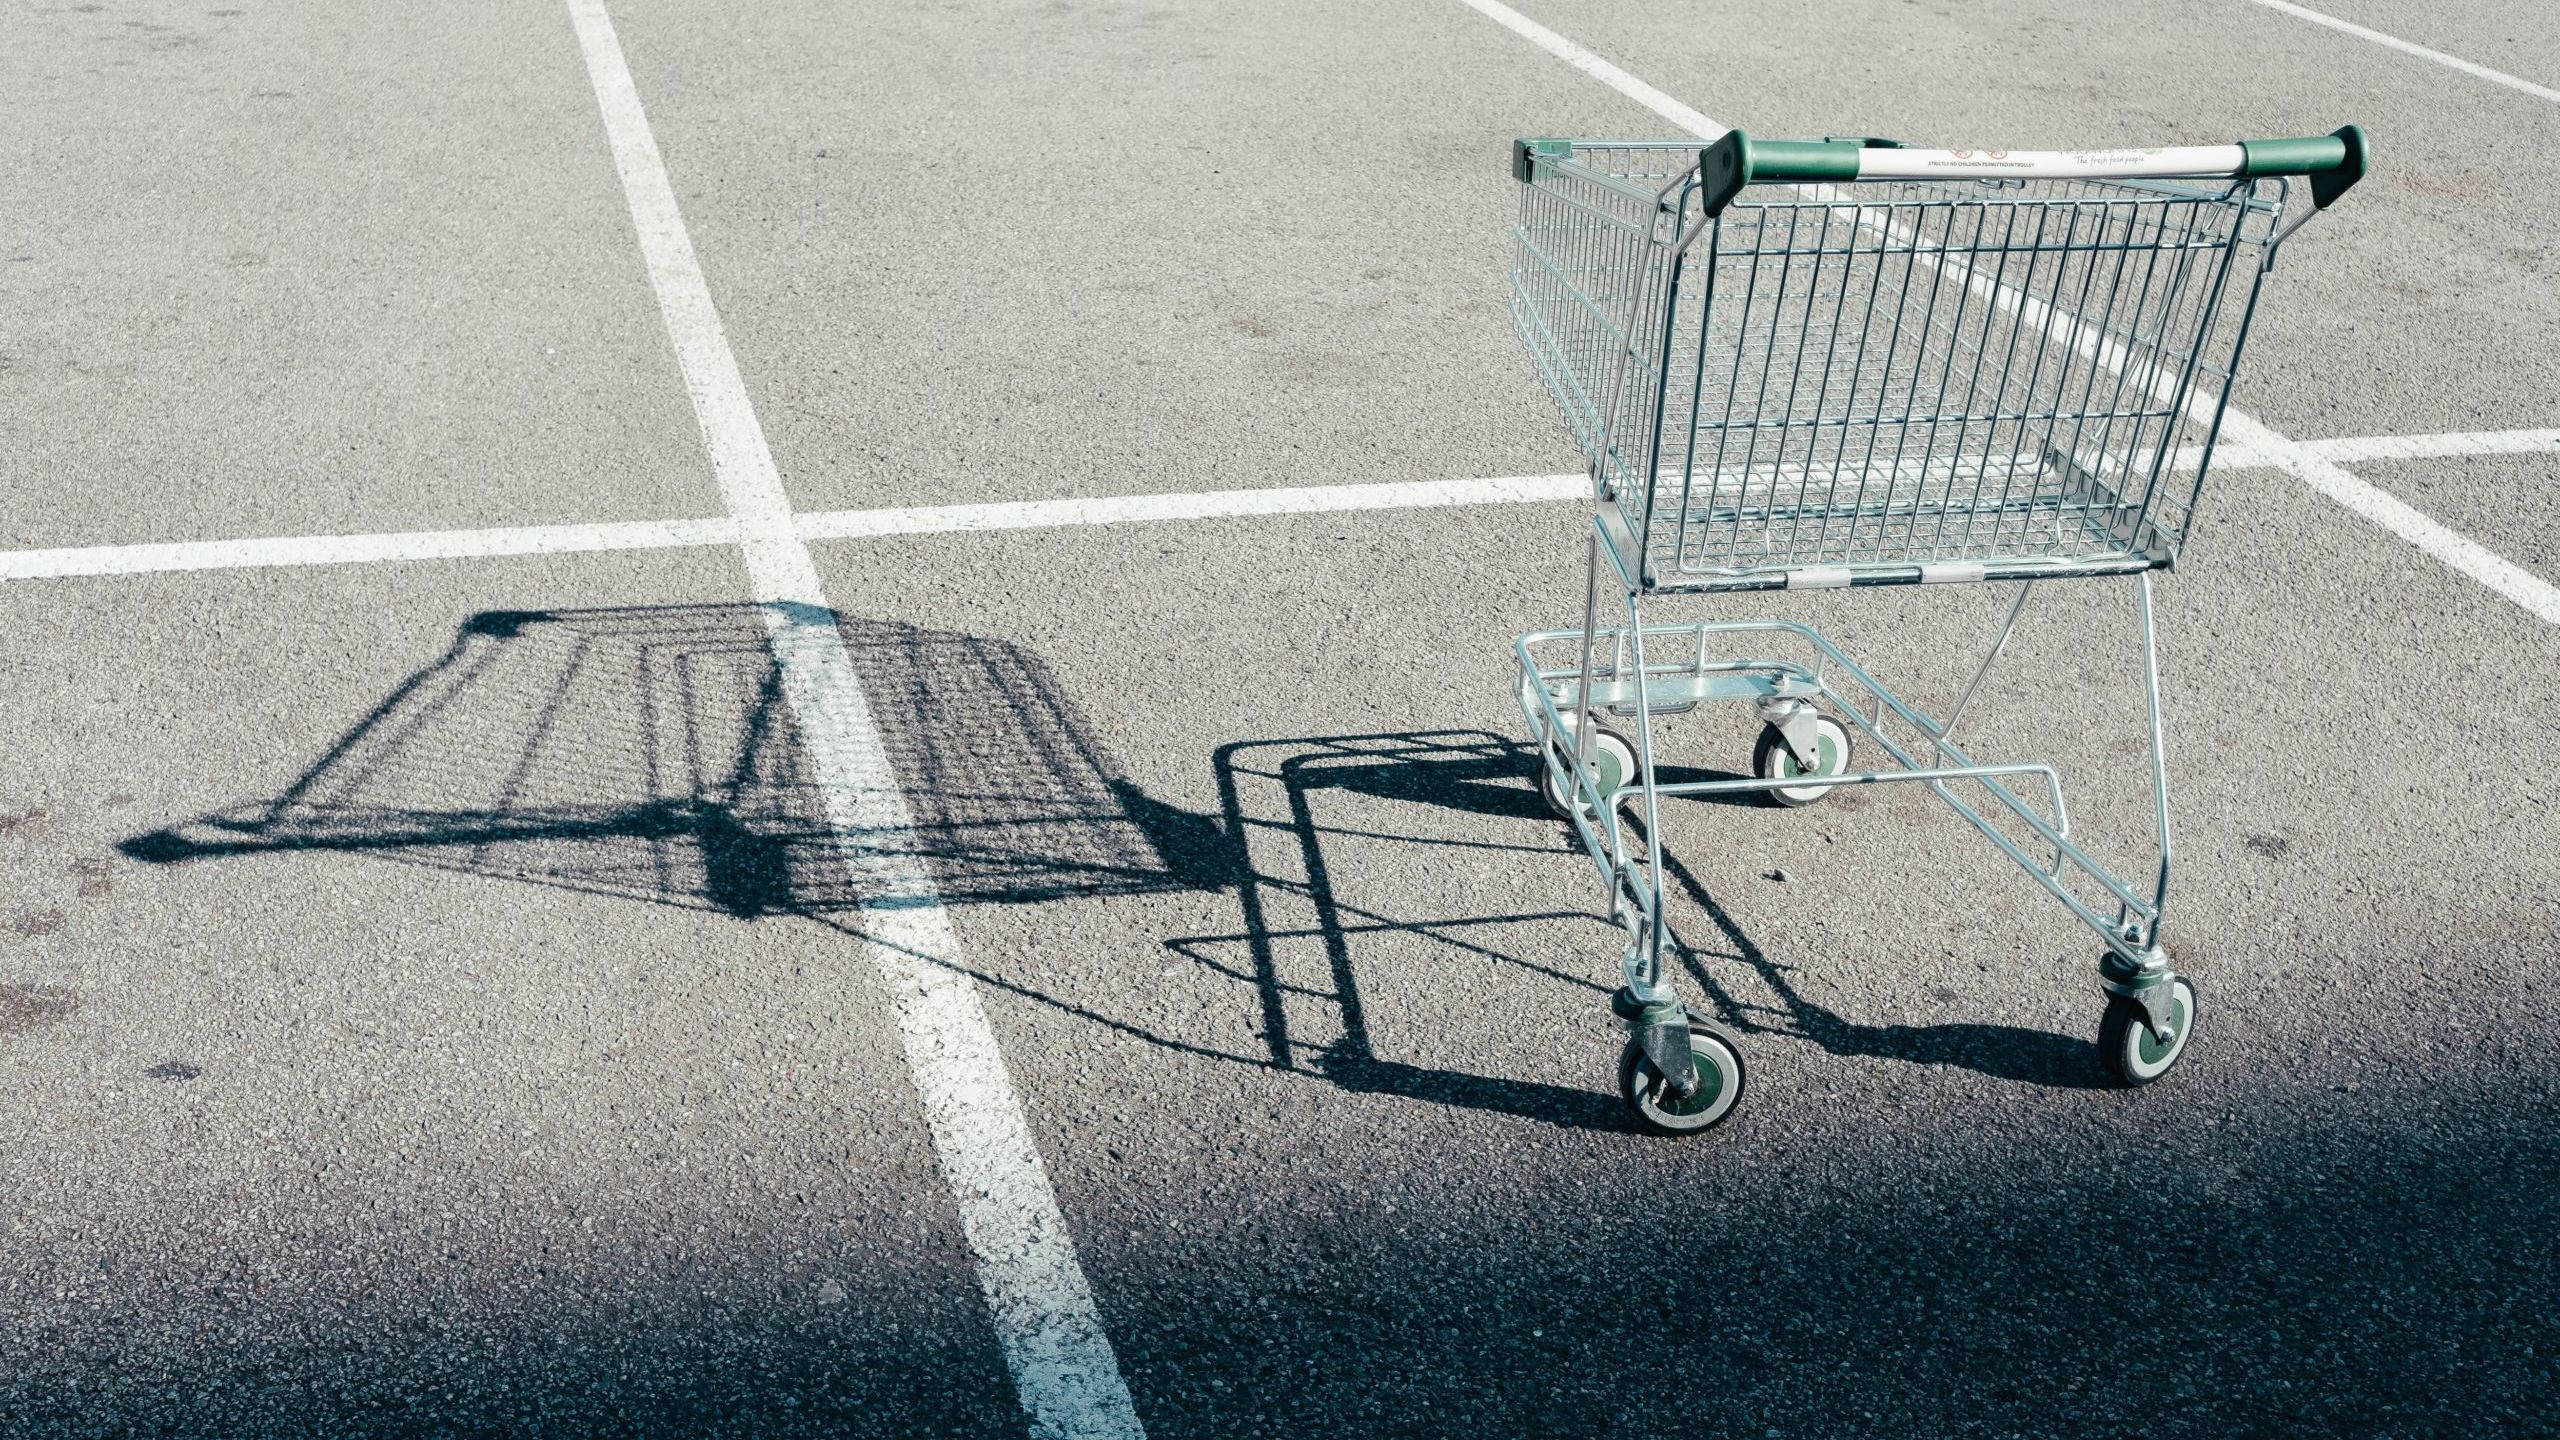 Cart depicting Instacarts grocery shopping option.